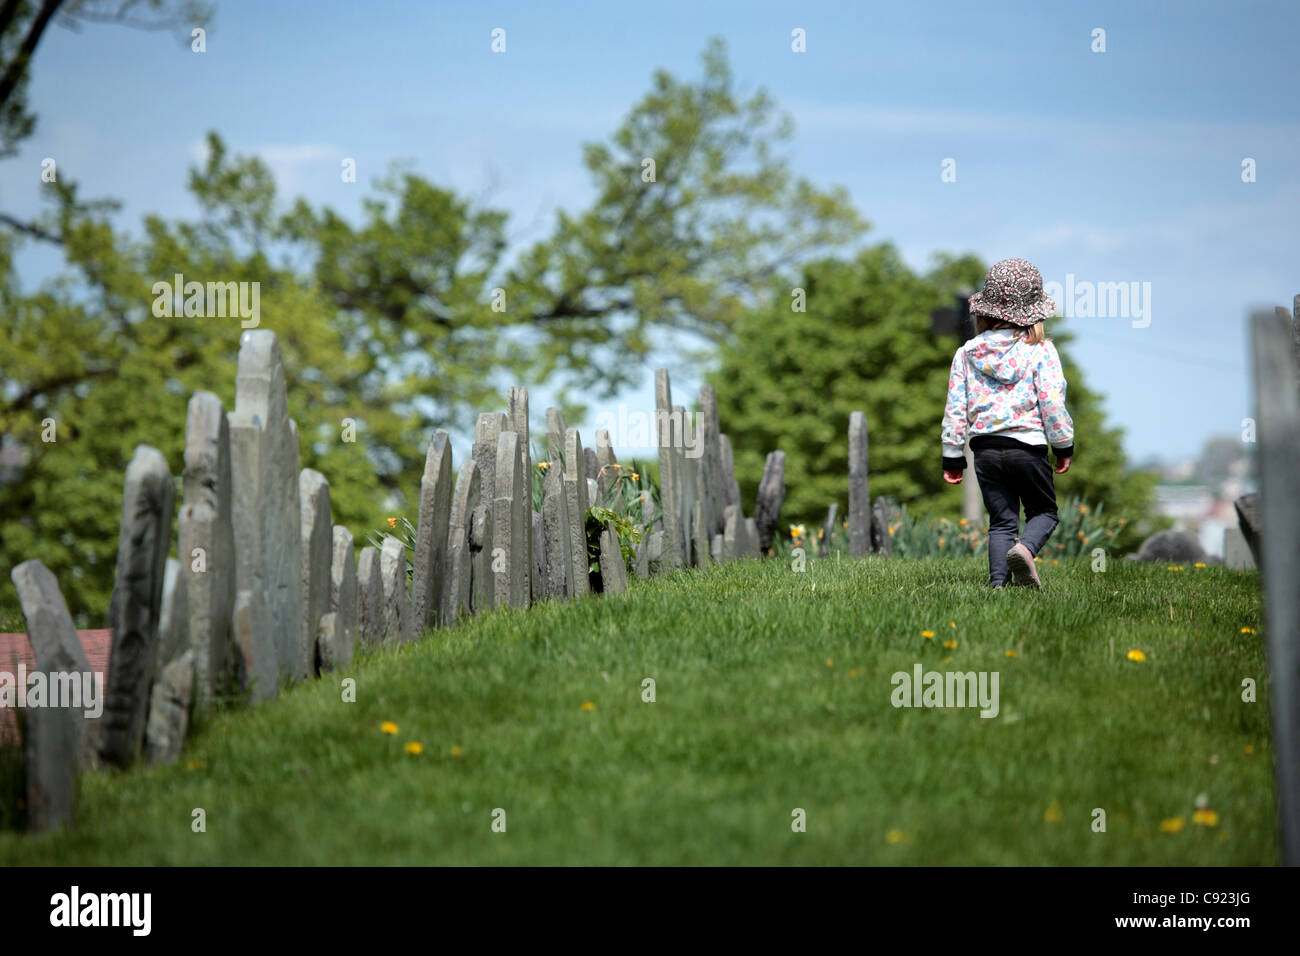 Boston has many historic burial grounds, some of which date back to the 18th century. Stock Photo